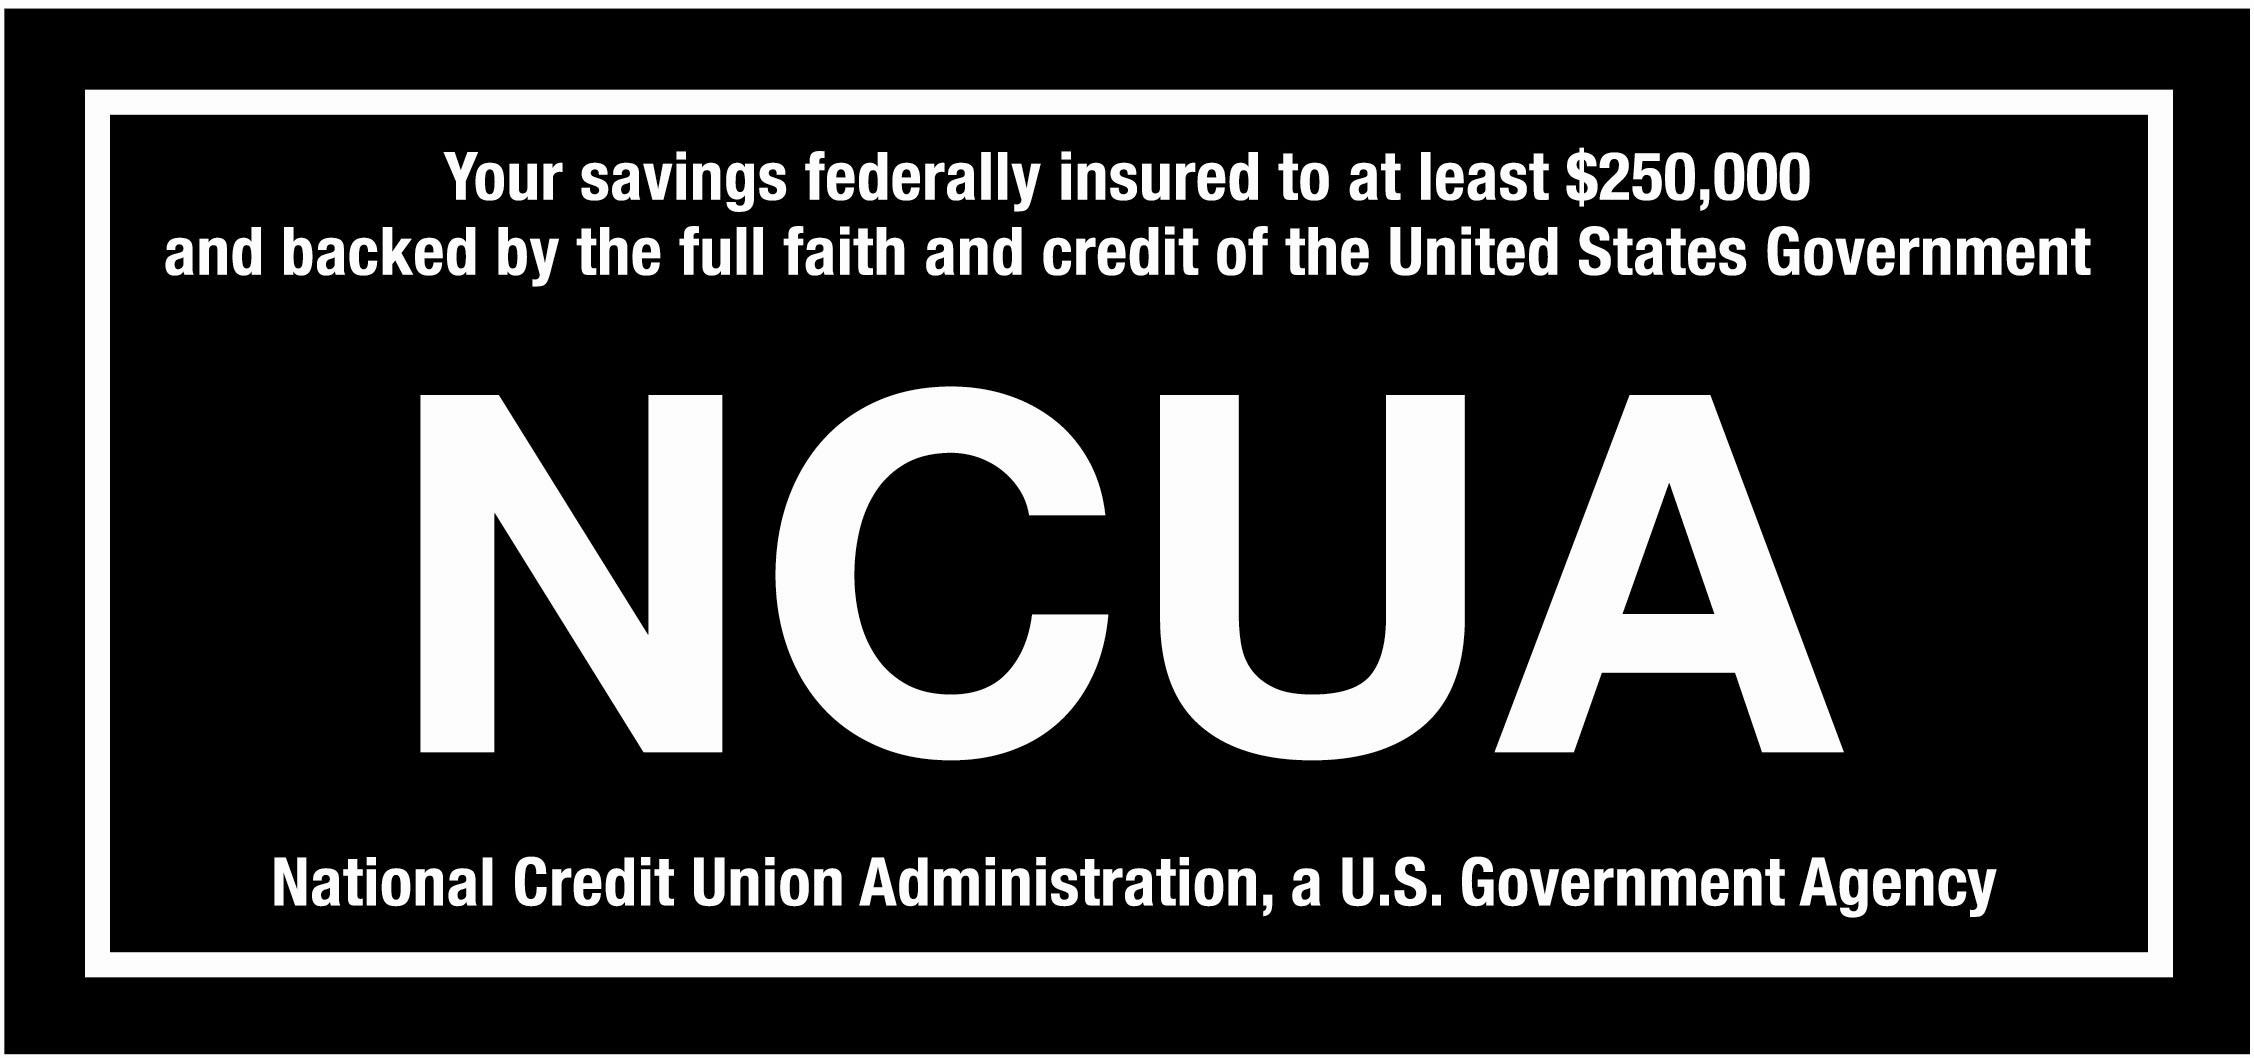 Federally insured up to $250,000 by the National Credit Union Association (NCUA)